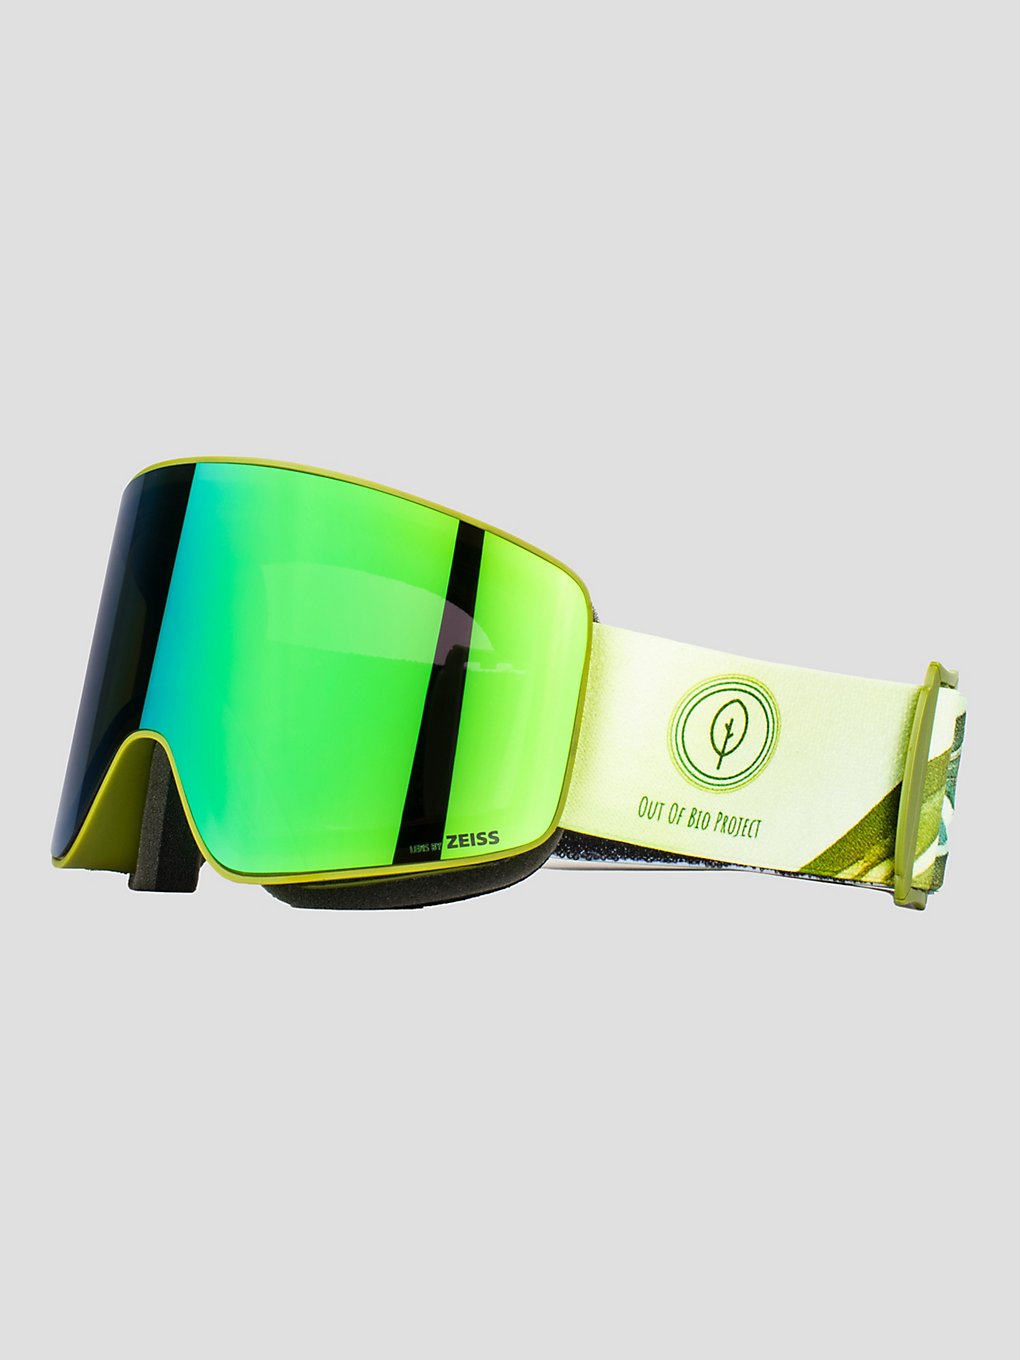 Out Of Bio Project Green Goggle green mci kaufen